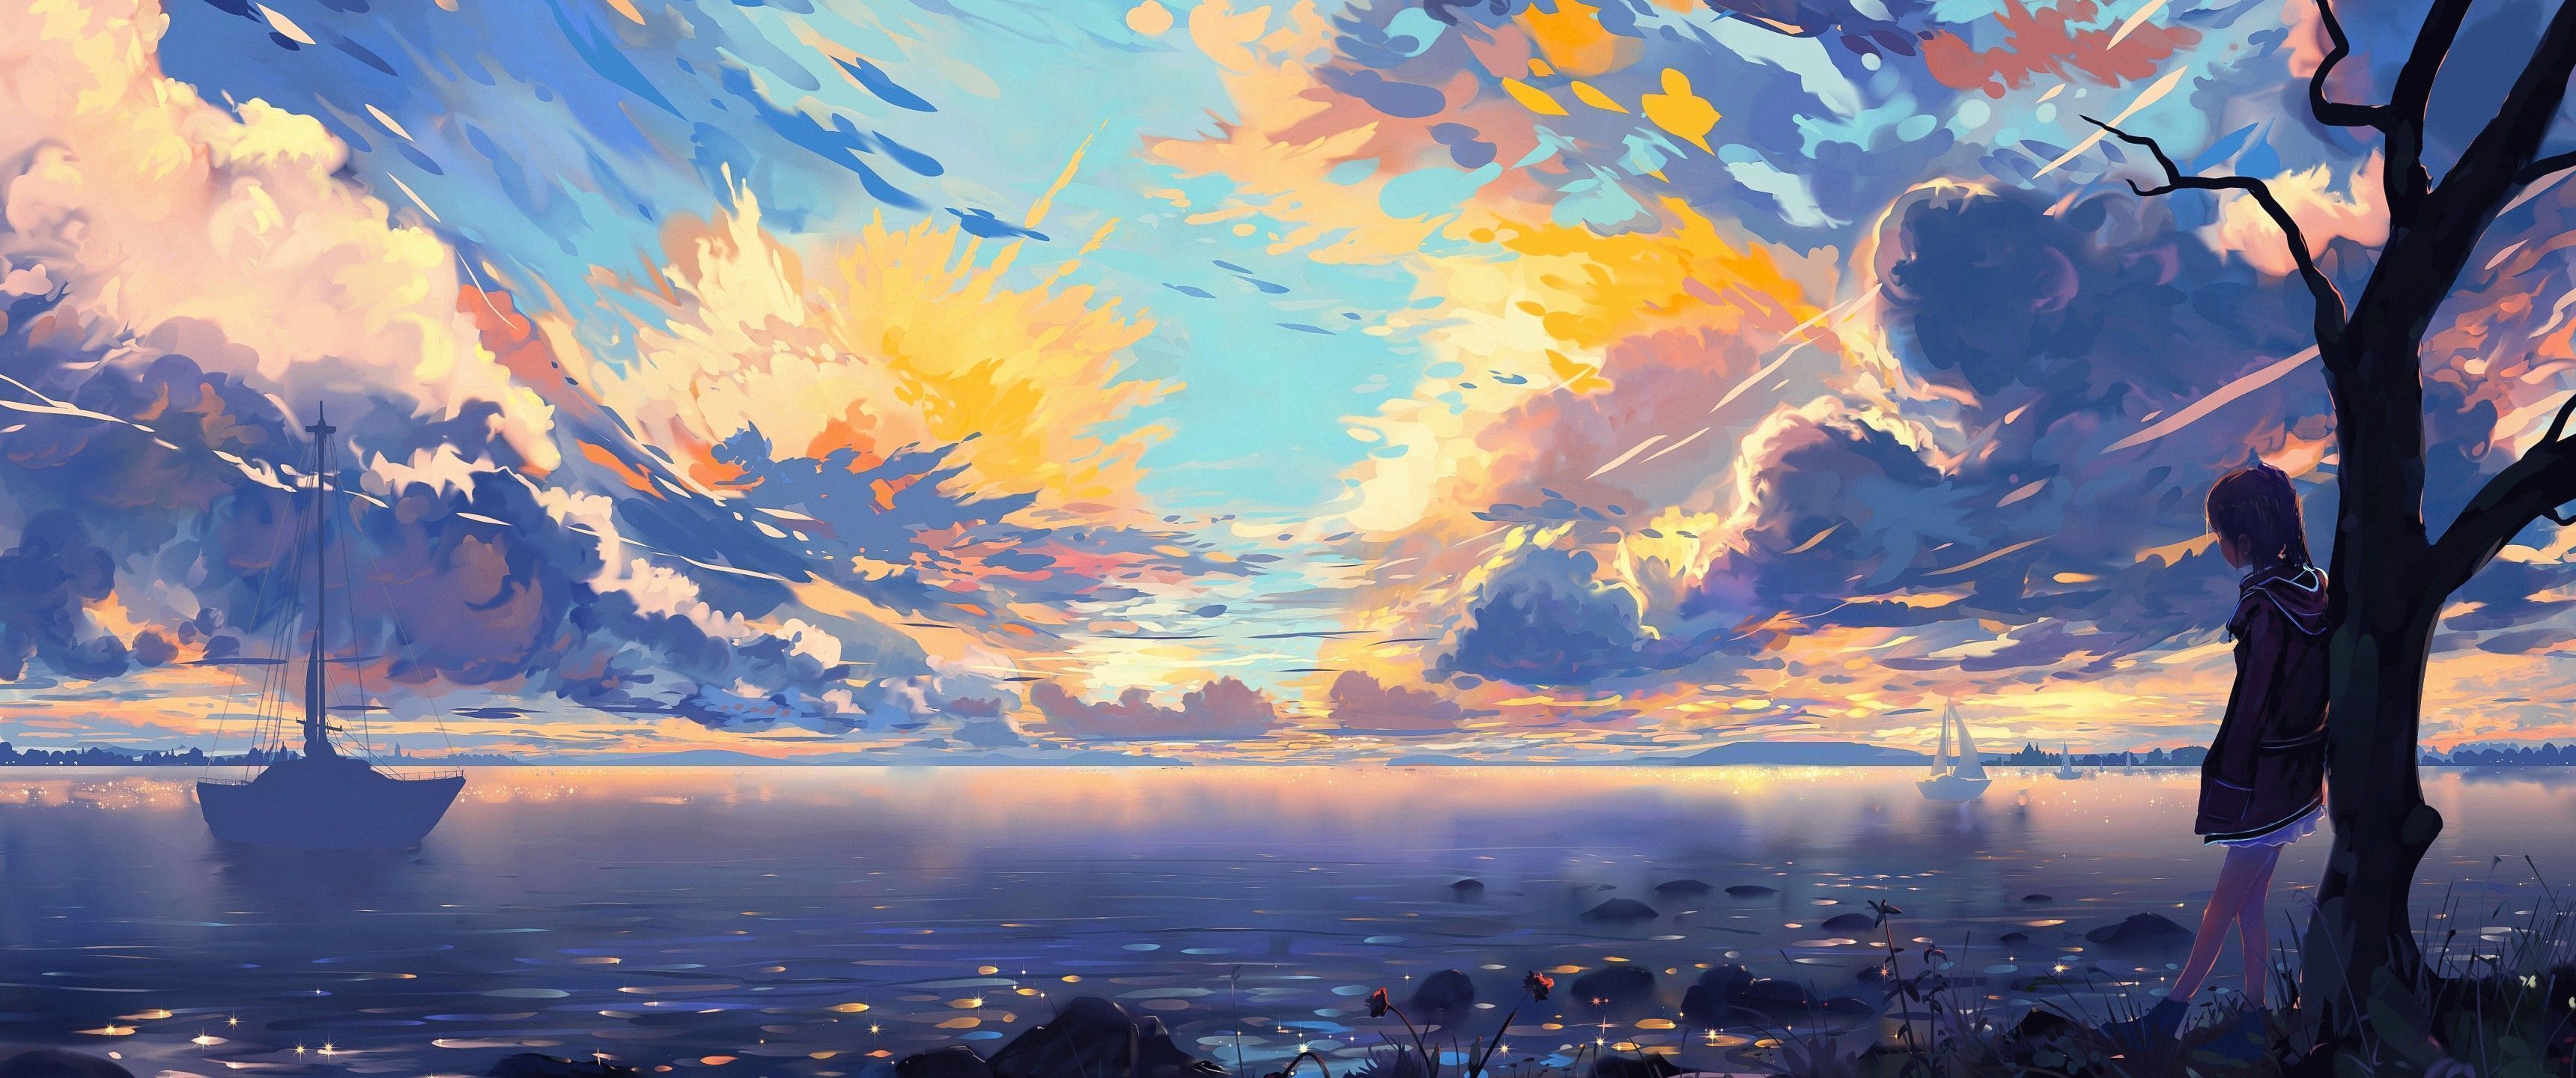 Anime girl looking at the sea at sunset - 3440x1440